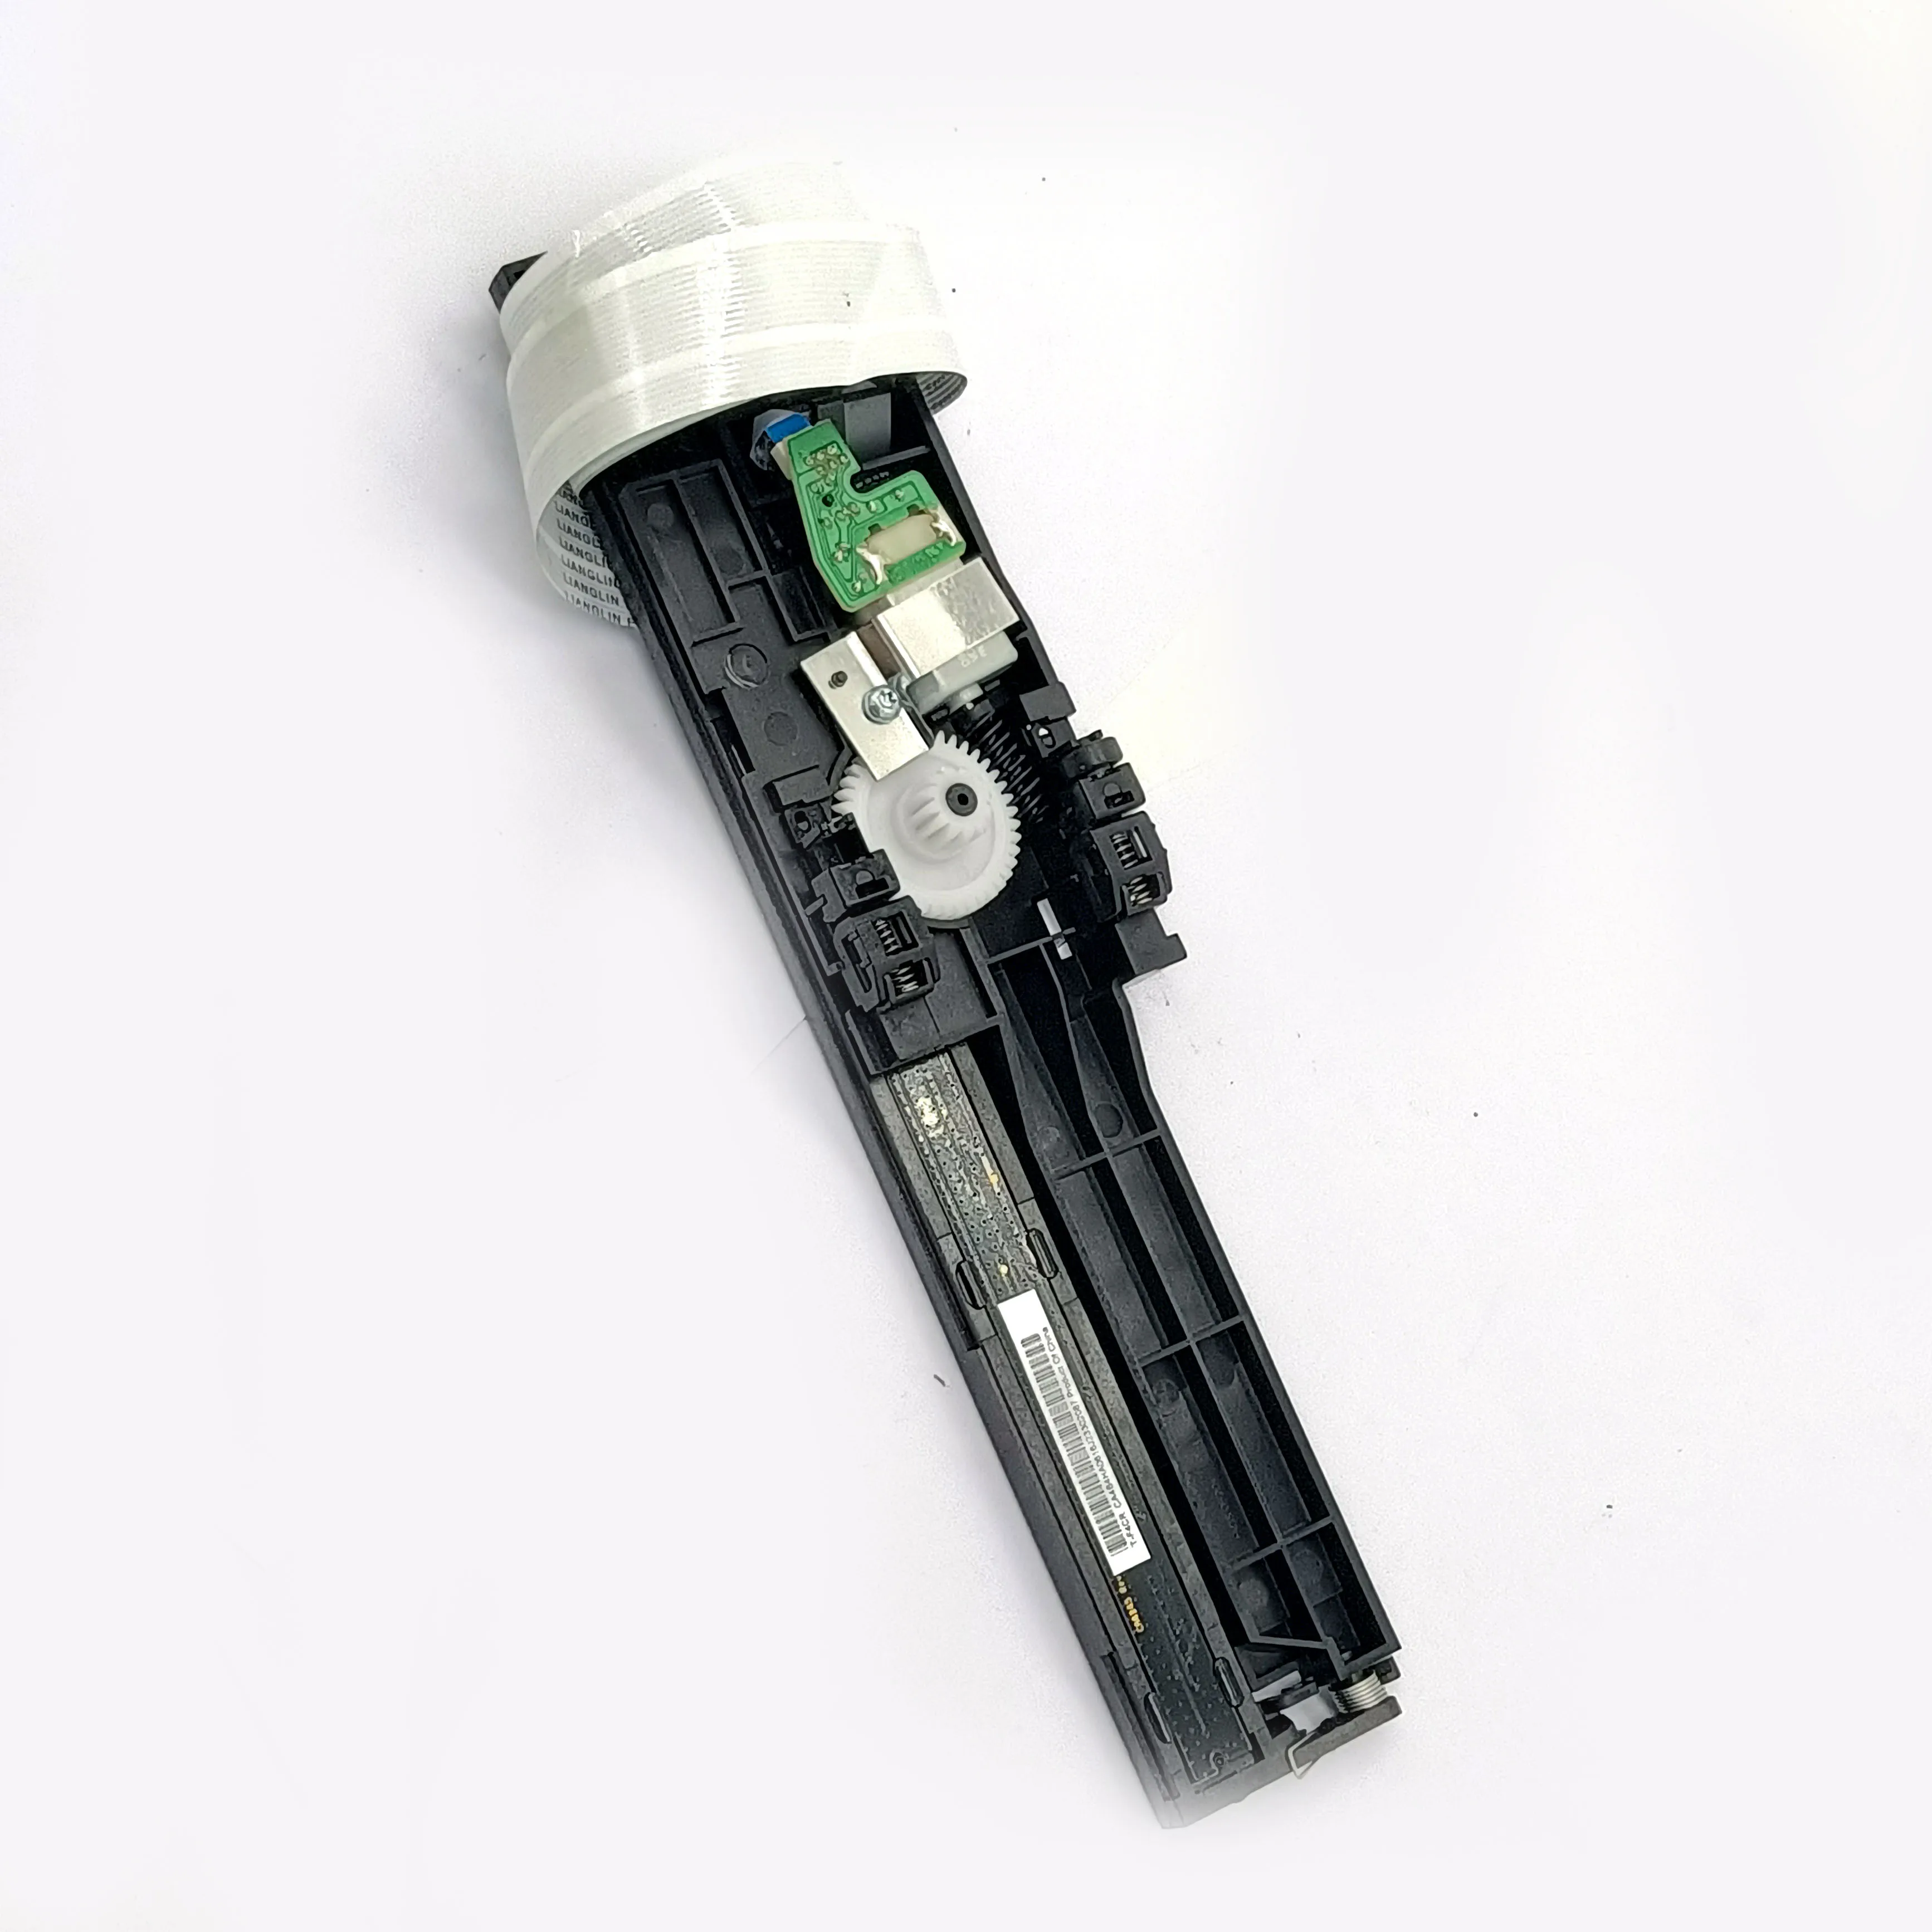 

Scanner Head 8720 Fits For HP 8702 7710 8725 7720 8730 8720 8210 8728 8745 8710 8216 8715 8740 8700 7740